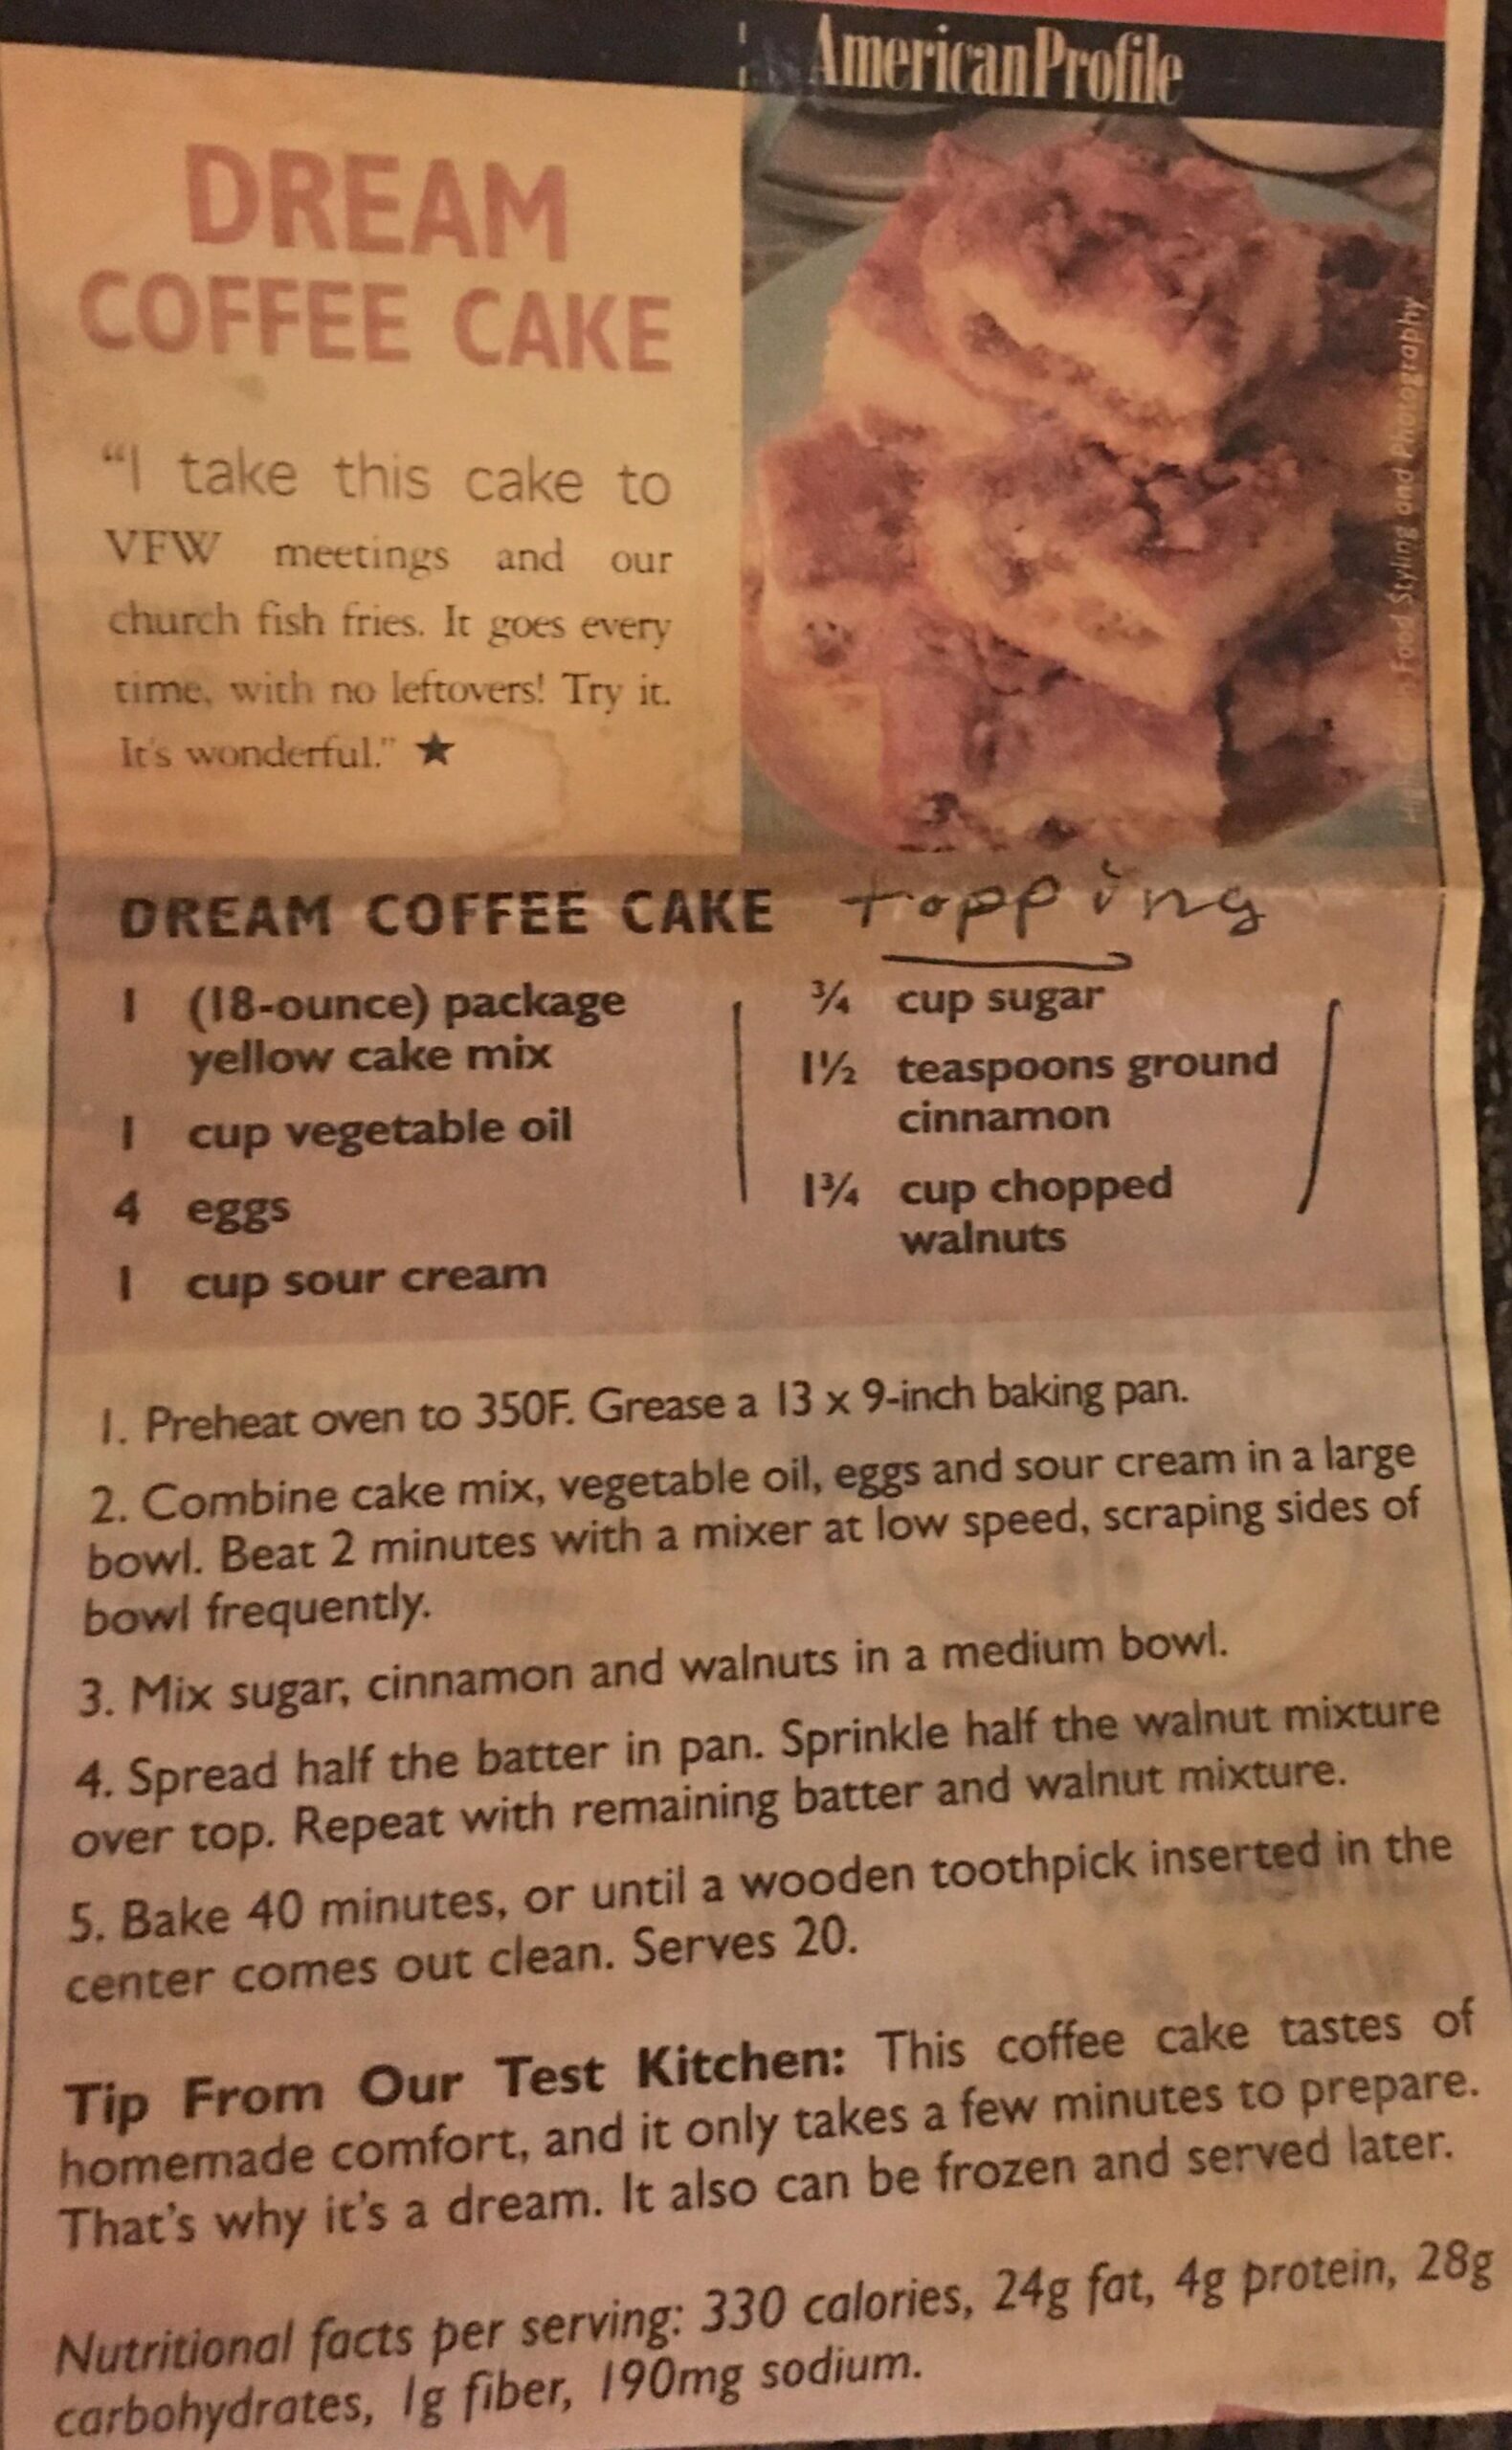  Start your day on a sweet note with Dream Coffee Cake.